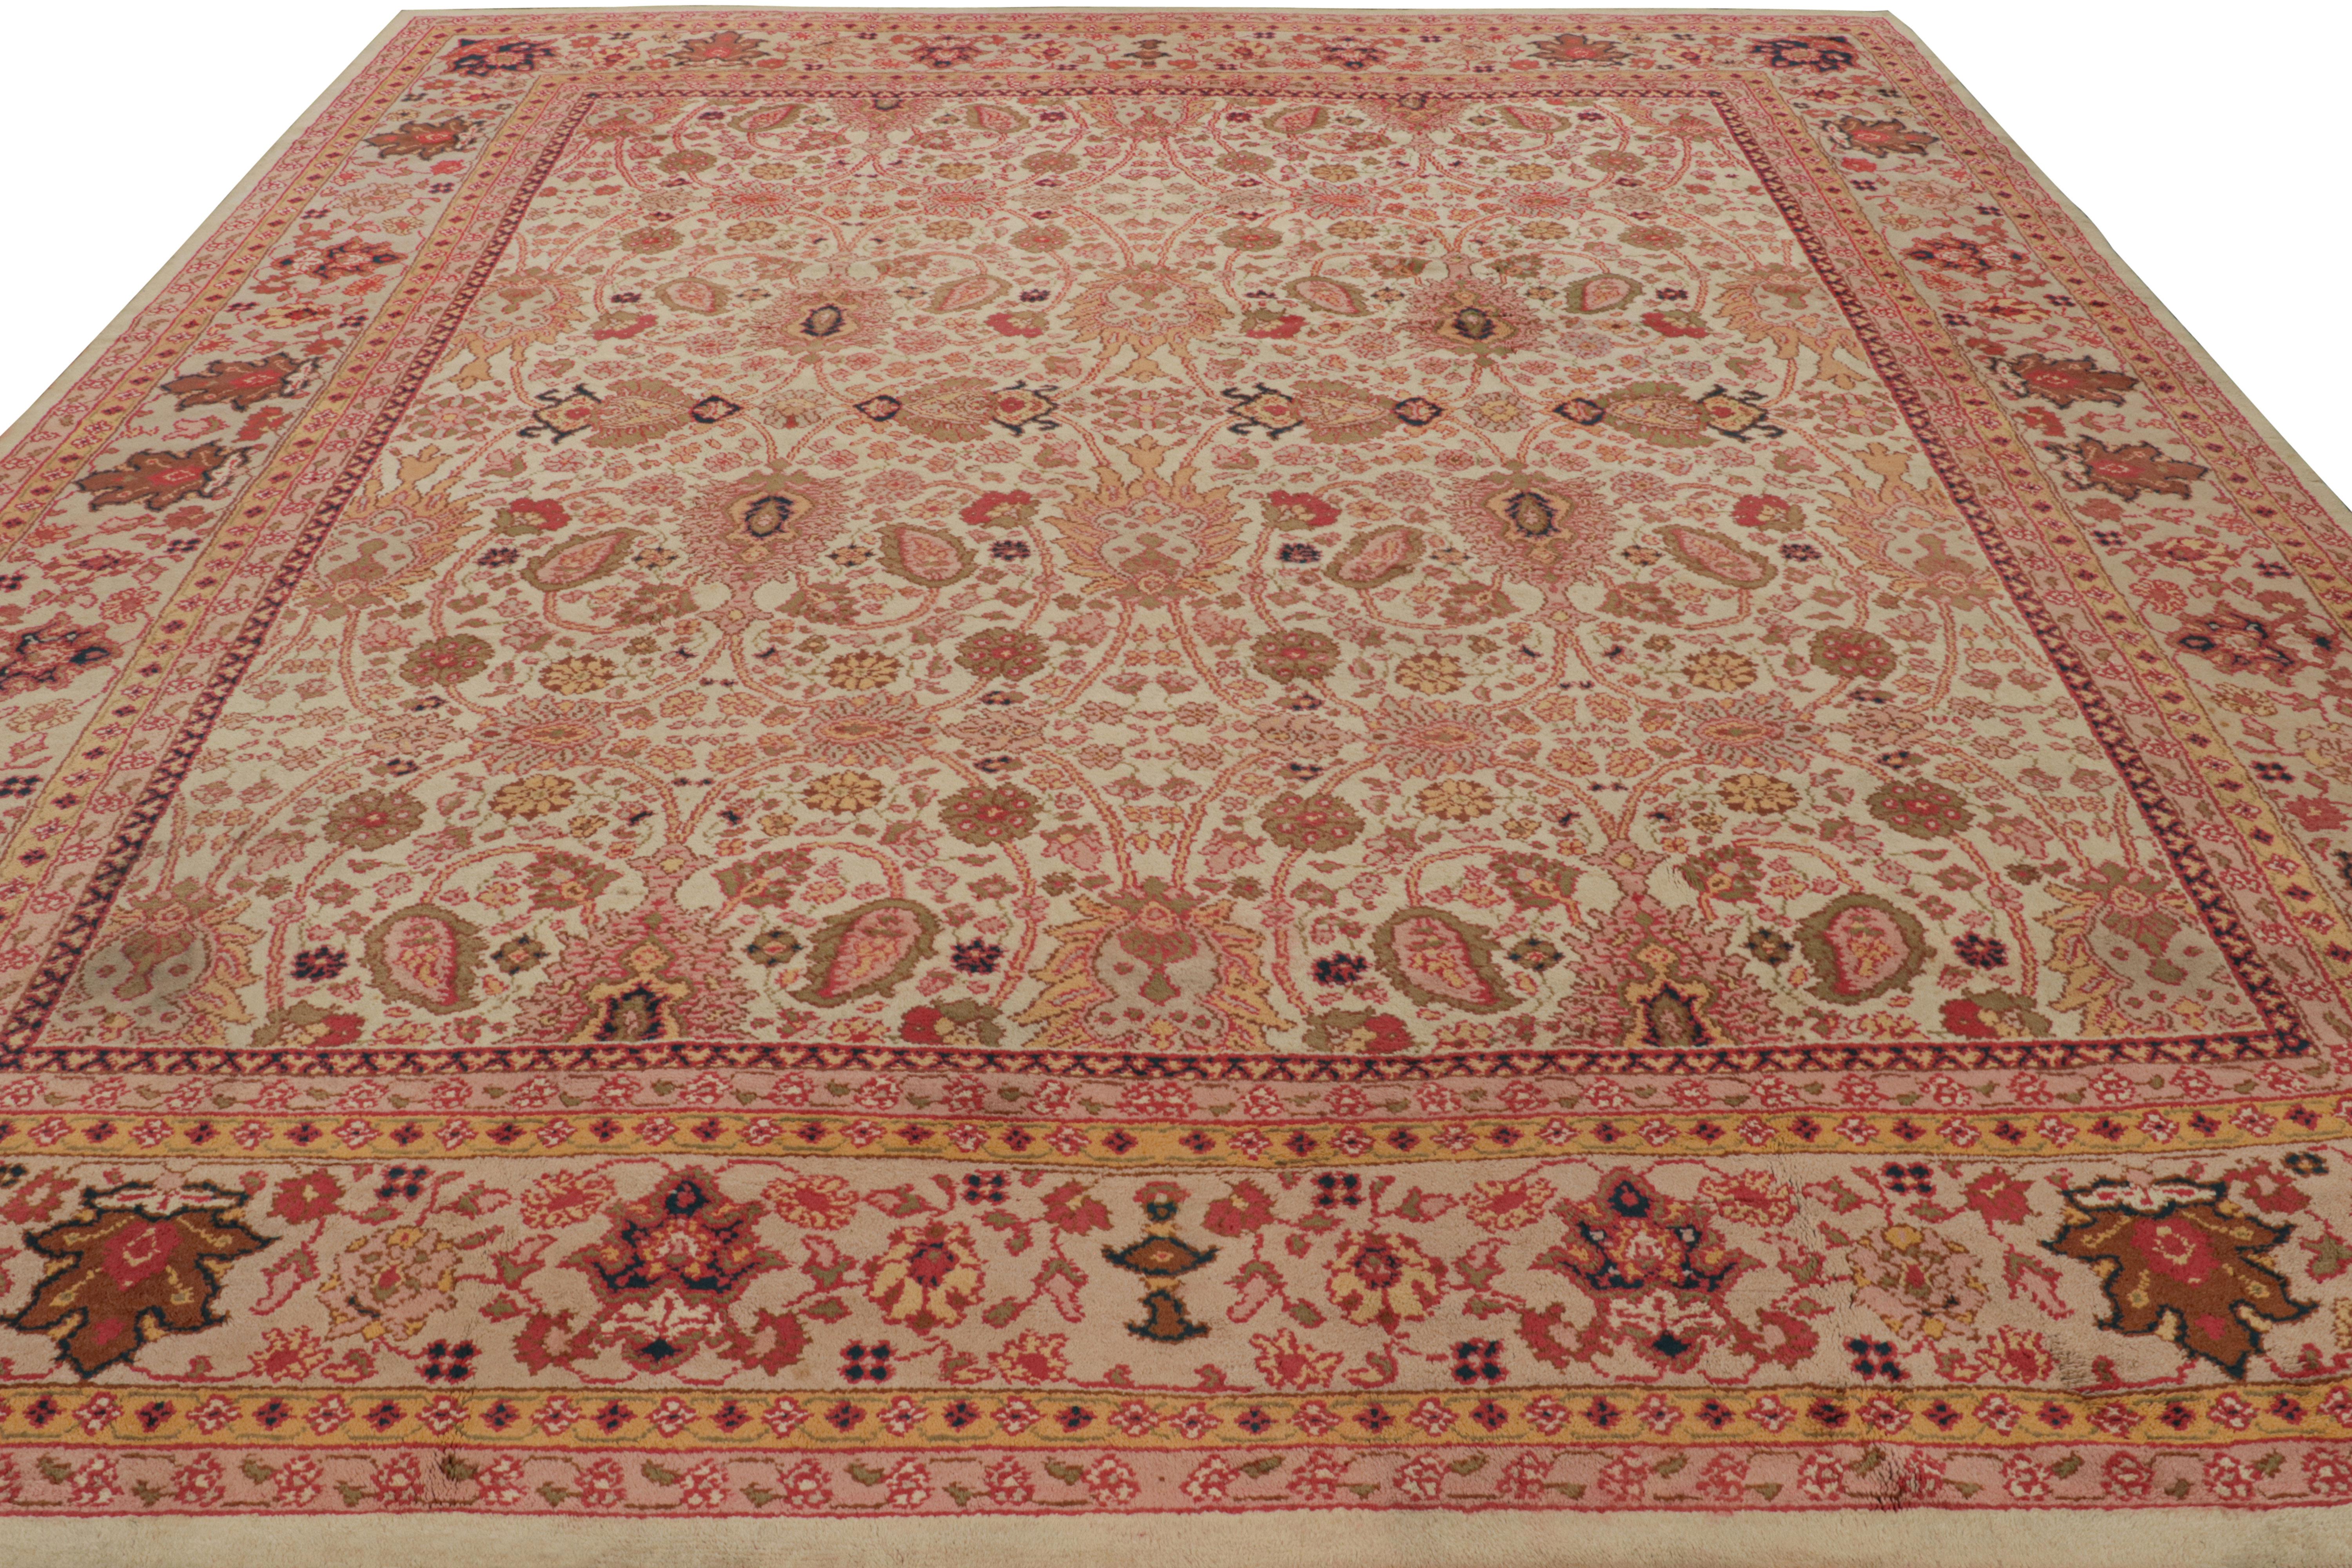 English Antique Arts & Crafts Rug in Beige with Pink Floral Patterns For Sale